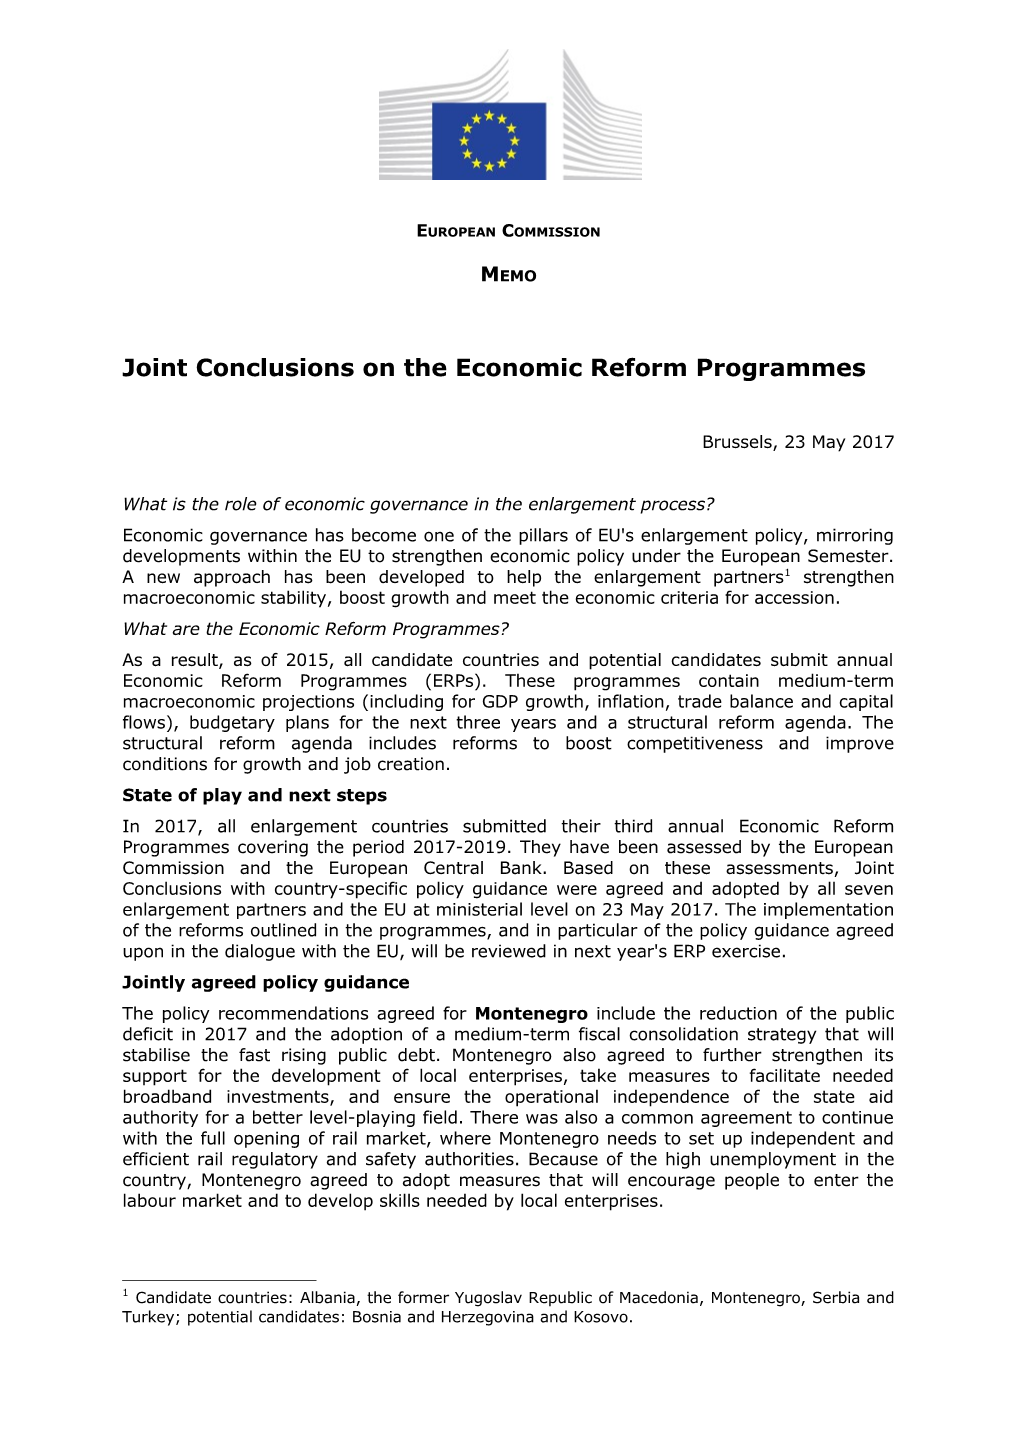 Joint Conclusions on the Economic Reform Programmes